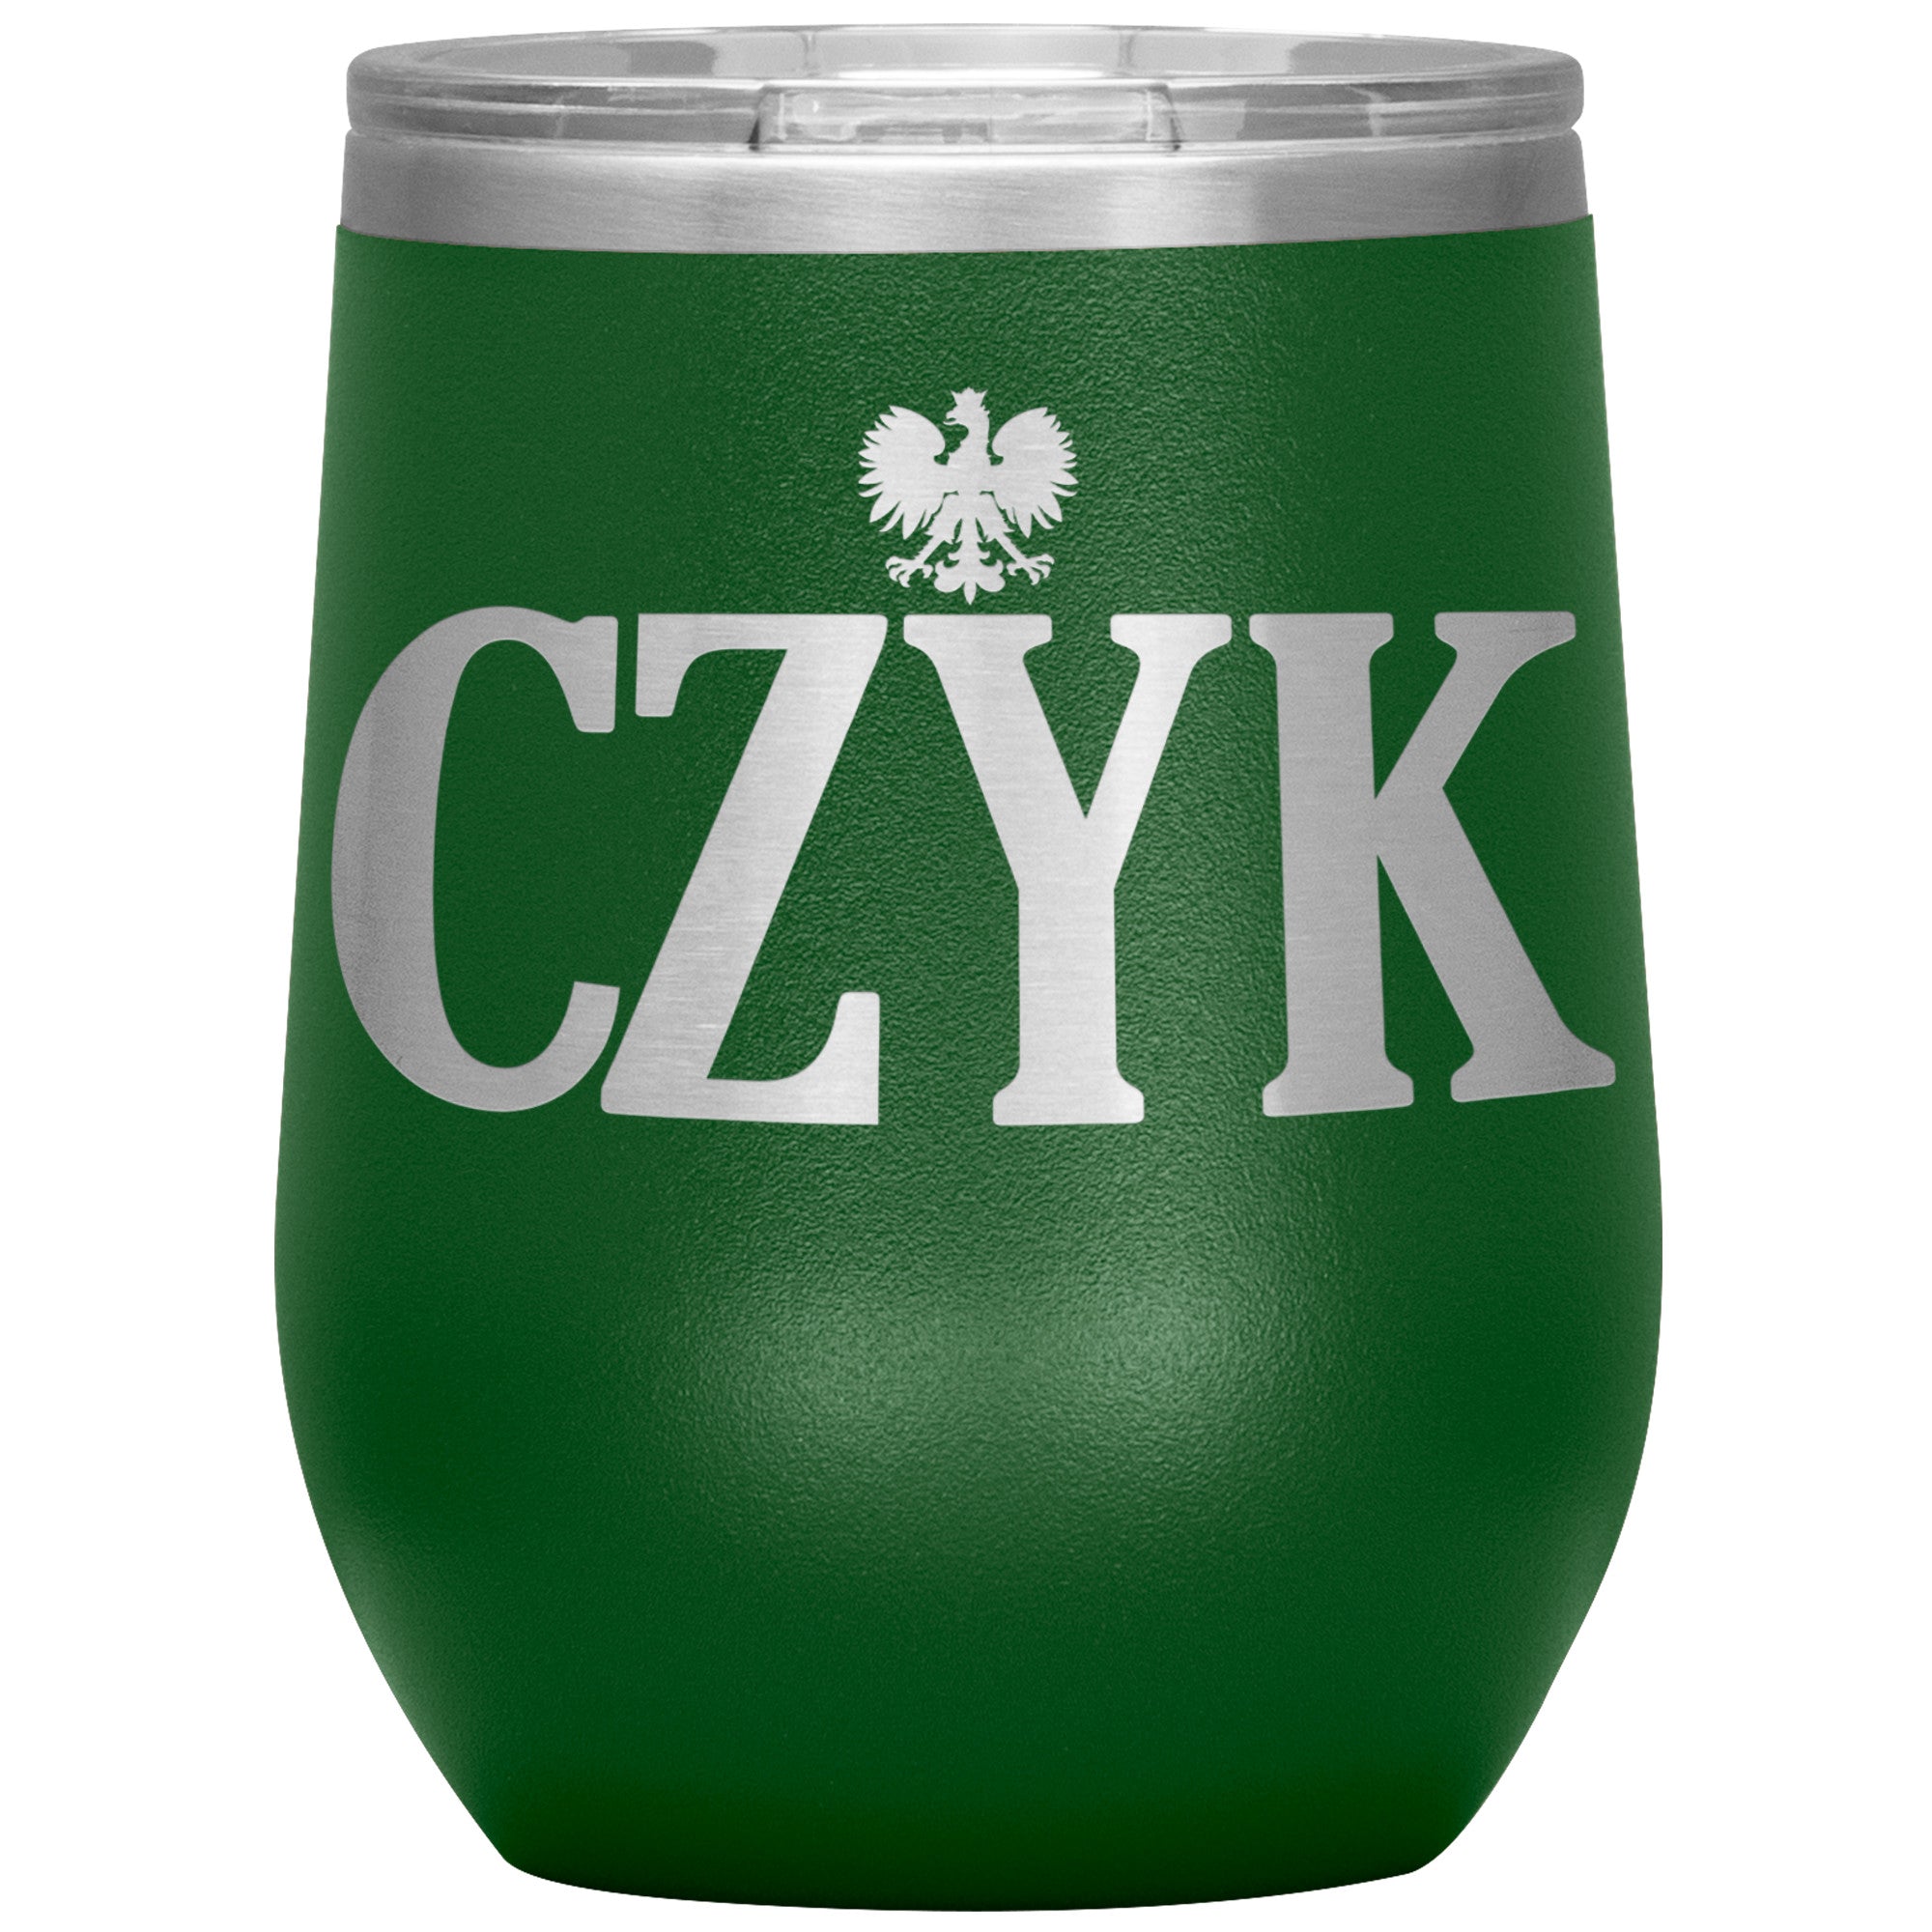 Polish Surnames Ending In CZYK Insulated Wine Tumbler Tumblers teelaunch Green  